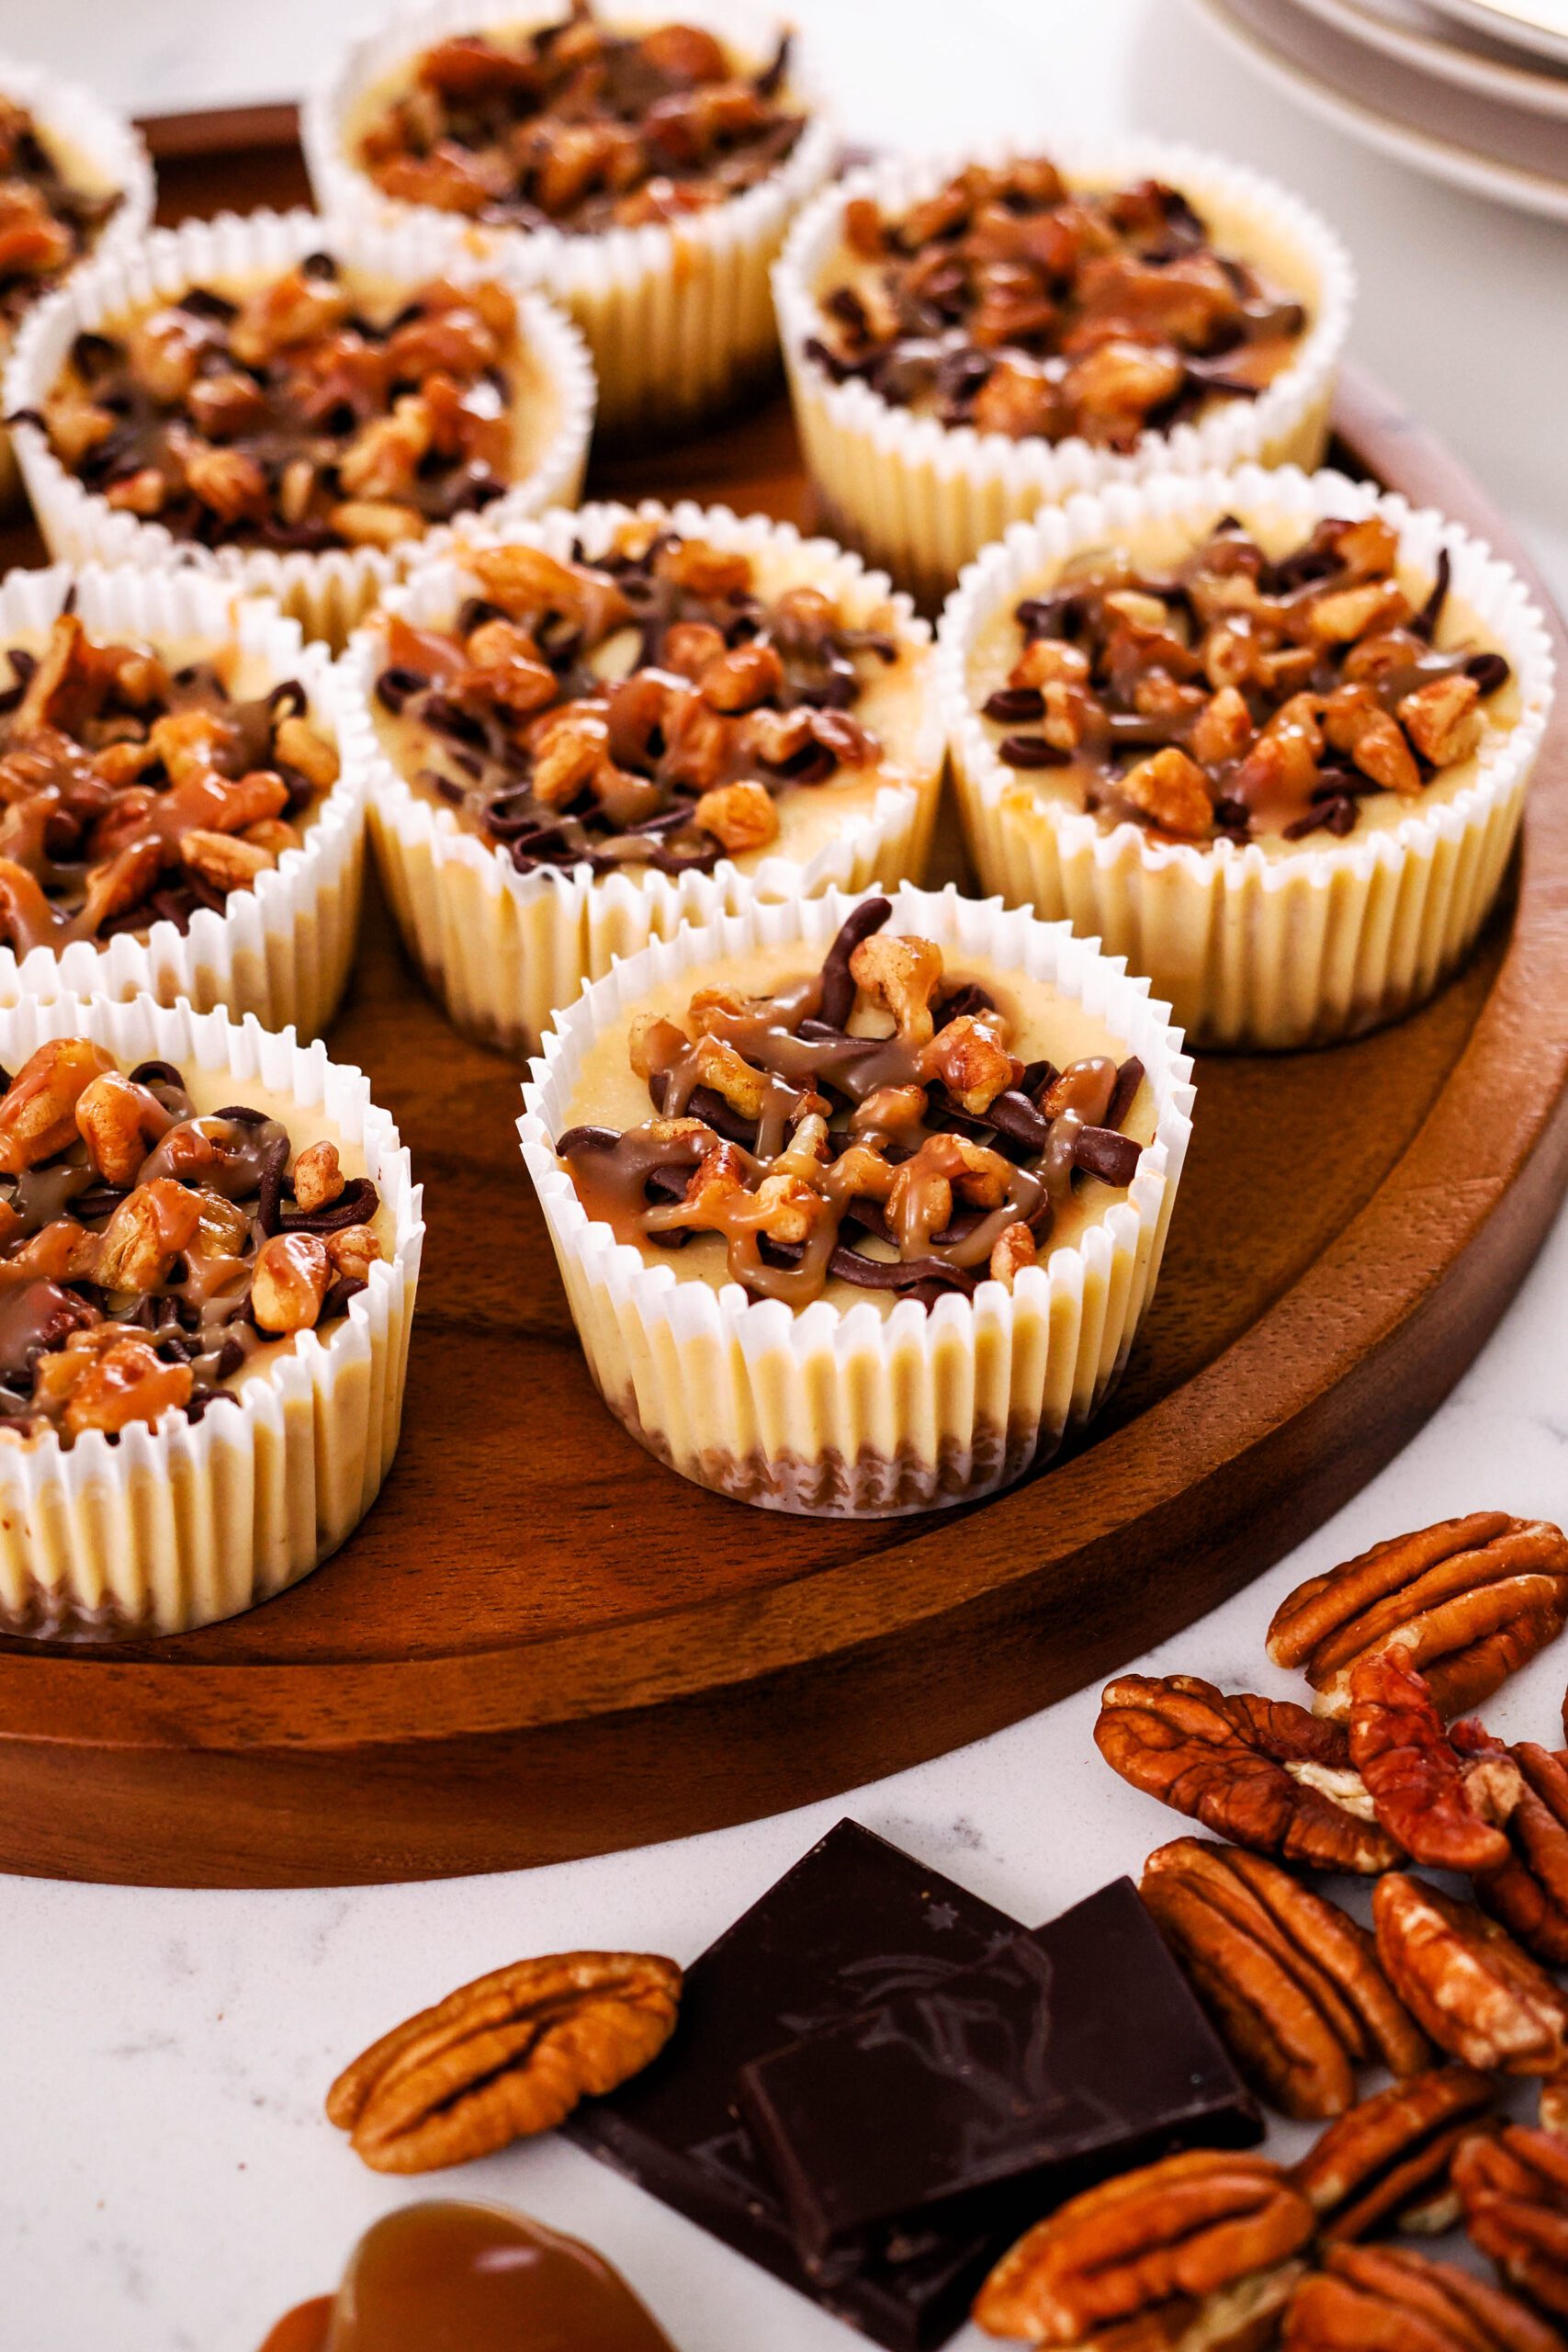 Mini turtle cheesecakes are plated on a wooden platter with pecans and chocolate squares around it.